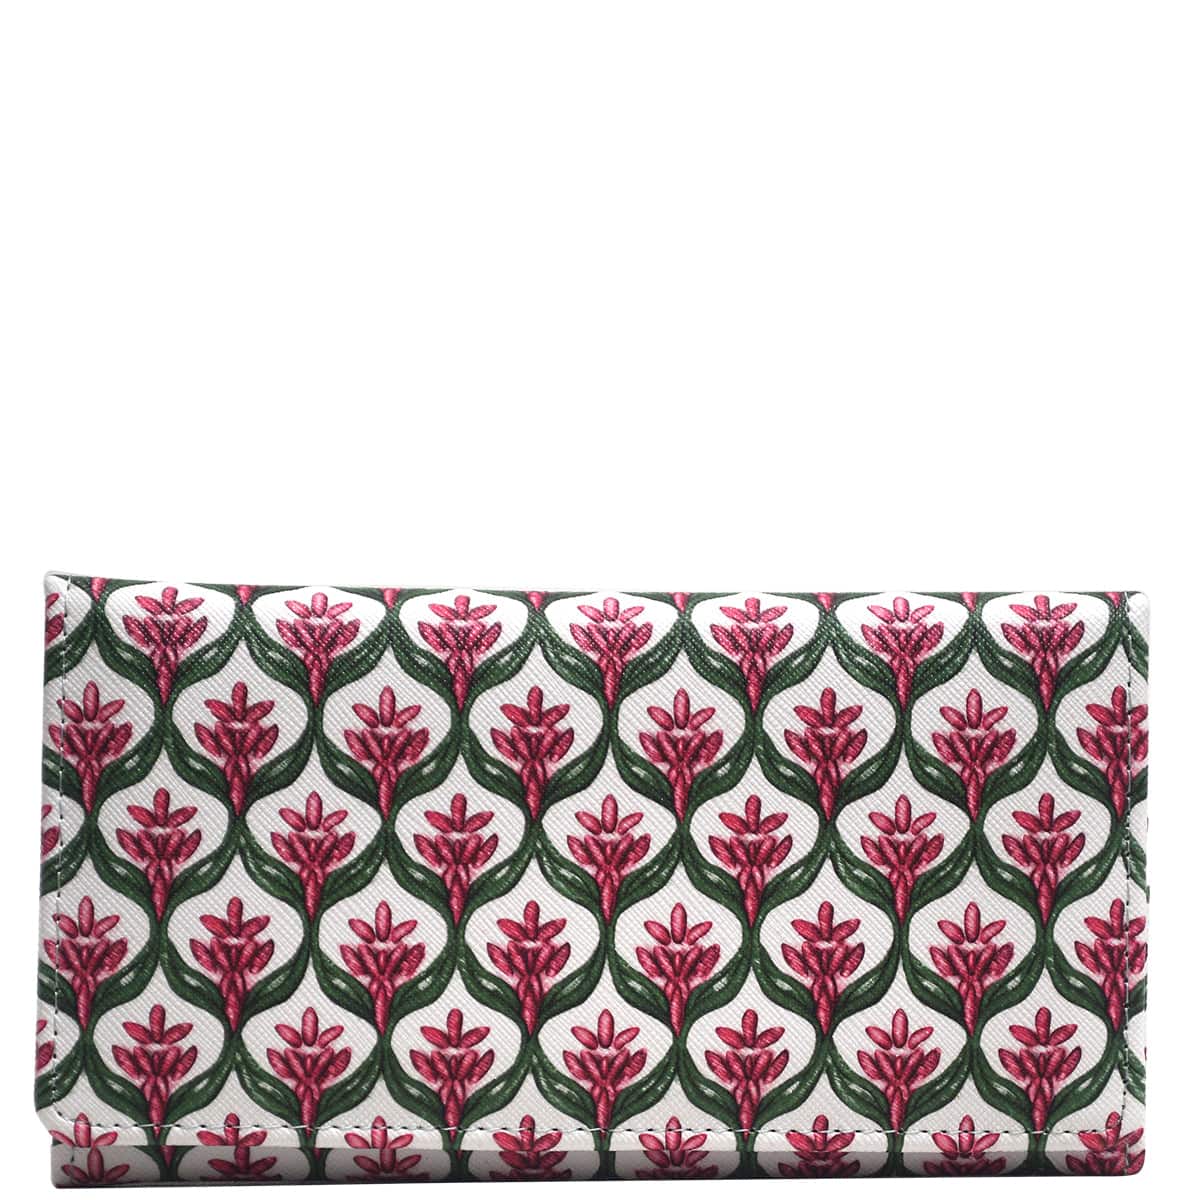 Wider Window Wallet - French Chateau Green Pink - 50% off - Catherine  Manuell Design